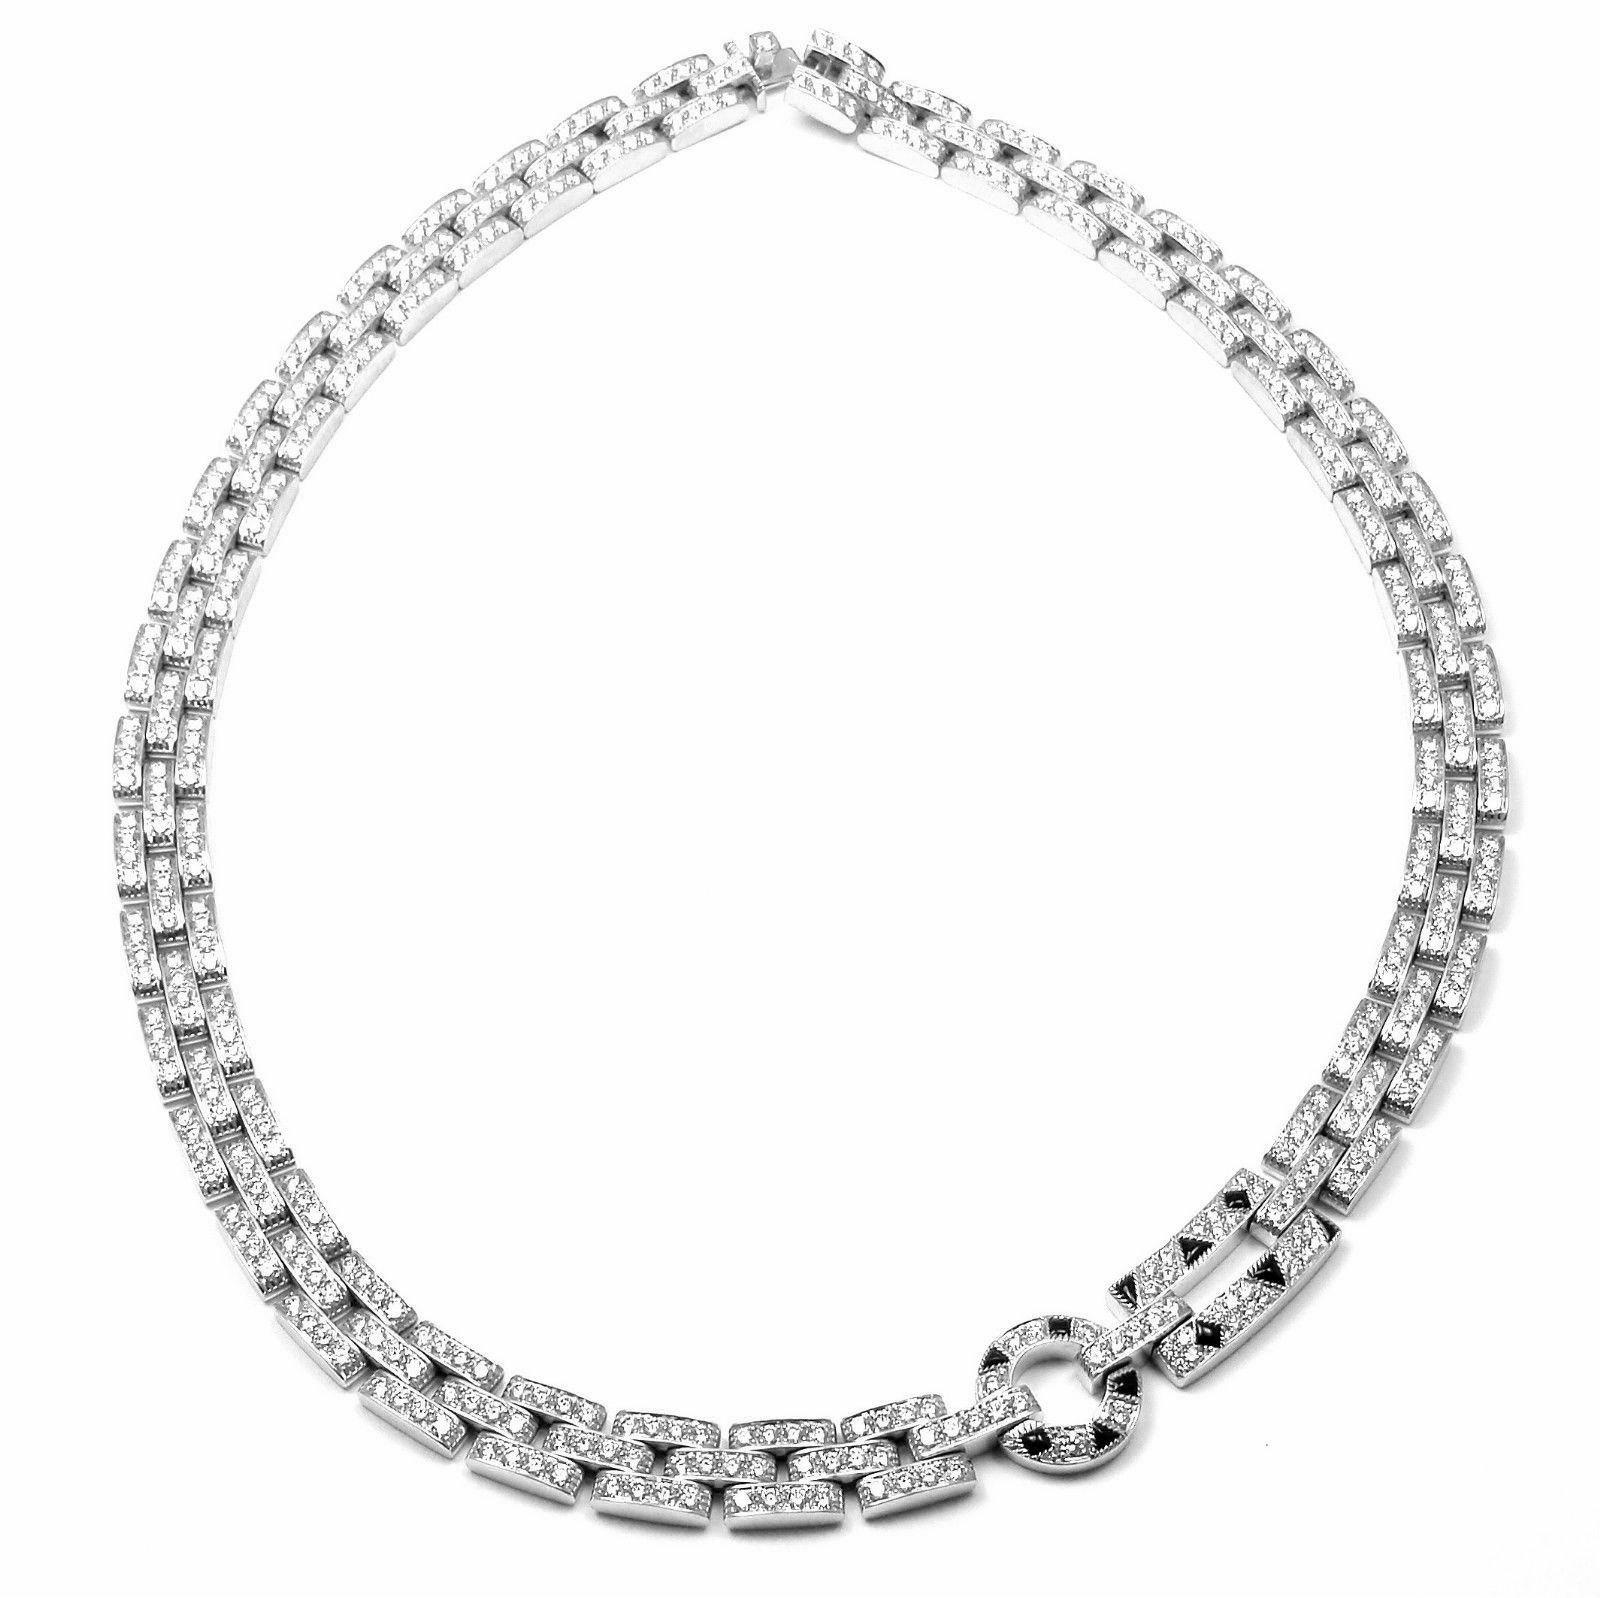 18k White Gold Diamond And Black Onyx Maillon Panthere Necklace by Cartier. 
This necklace comes with an original Cartier box and Cartier service paper from NYC store.
With 516 round brilliant cut diamonds VVS1 clarity, E color total weight